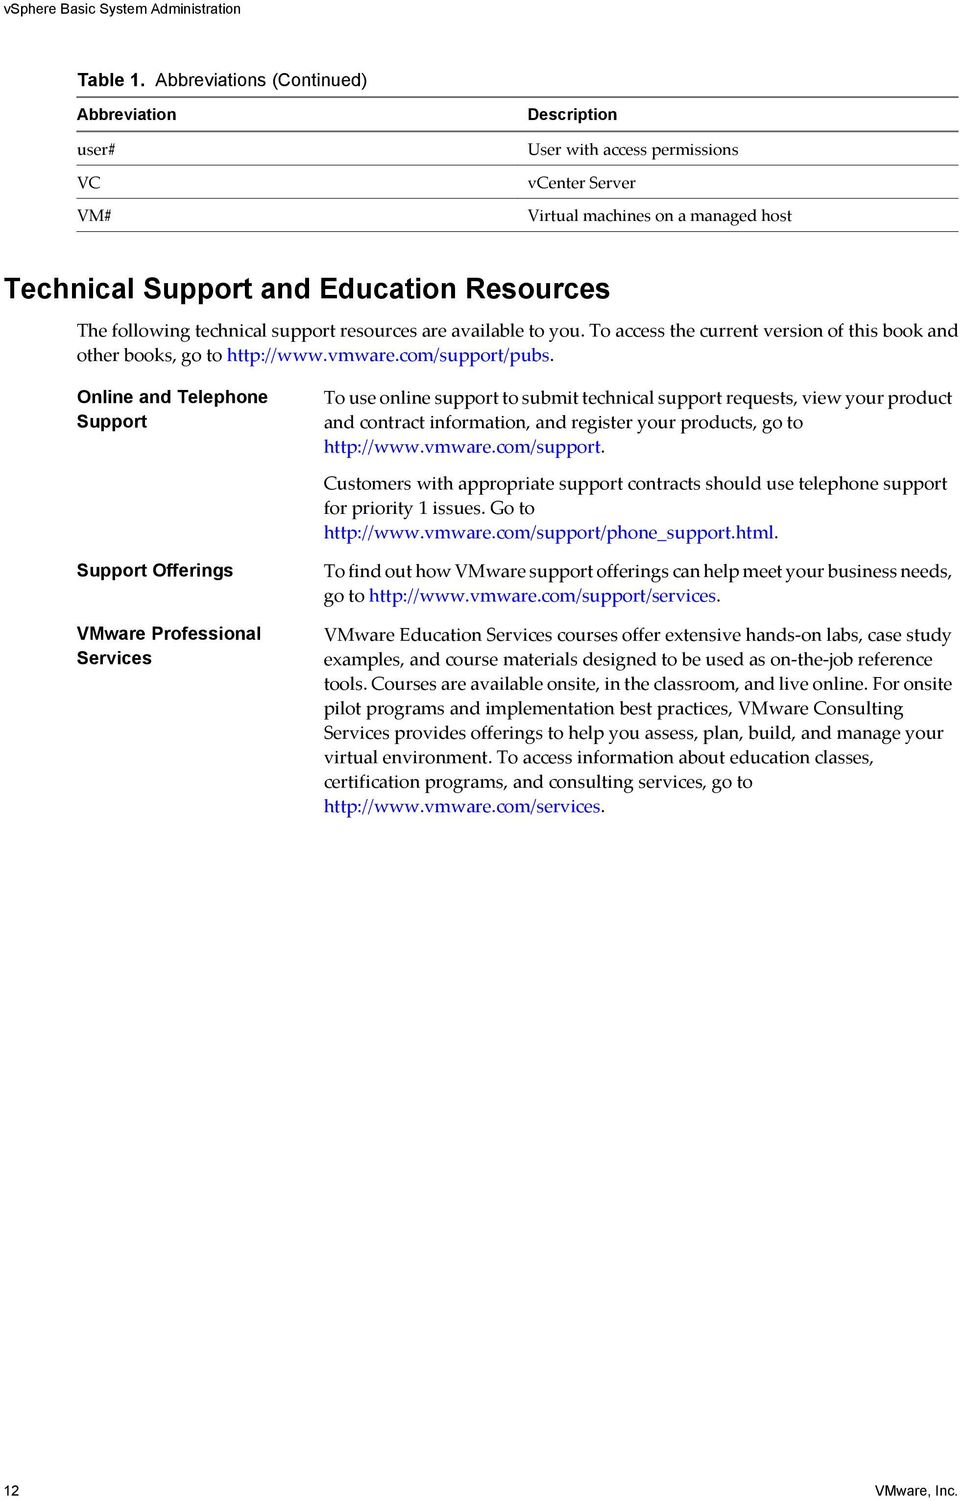 technical support resources are available to you. To access the current version of this book and other books, go to http://www.vmware.com/support/pubs.